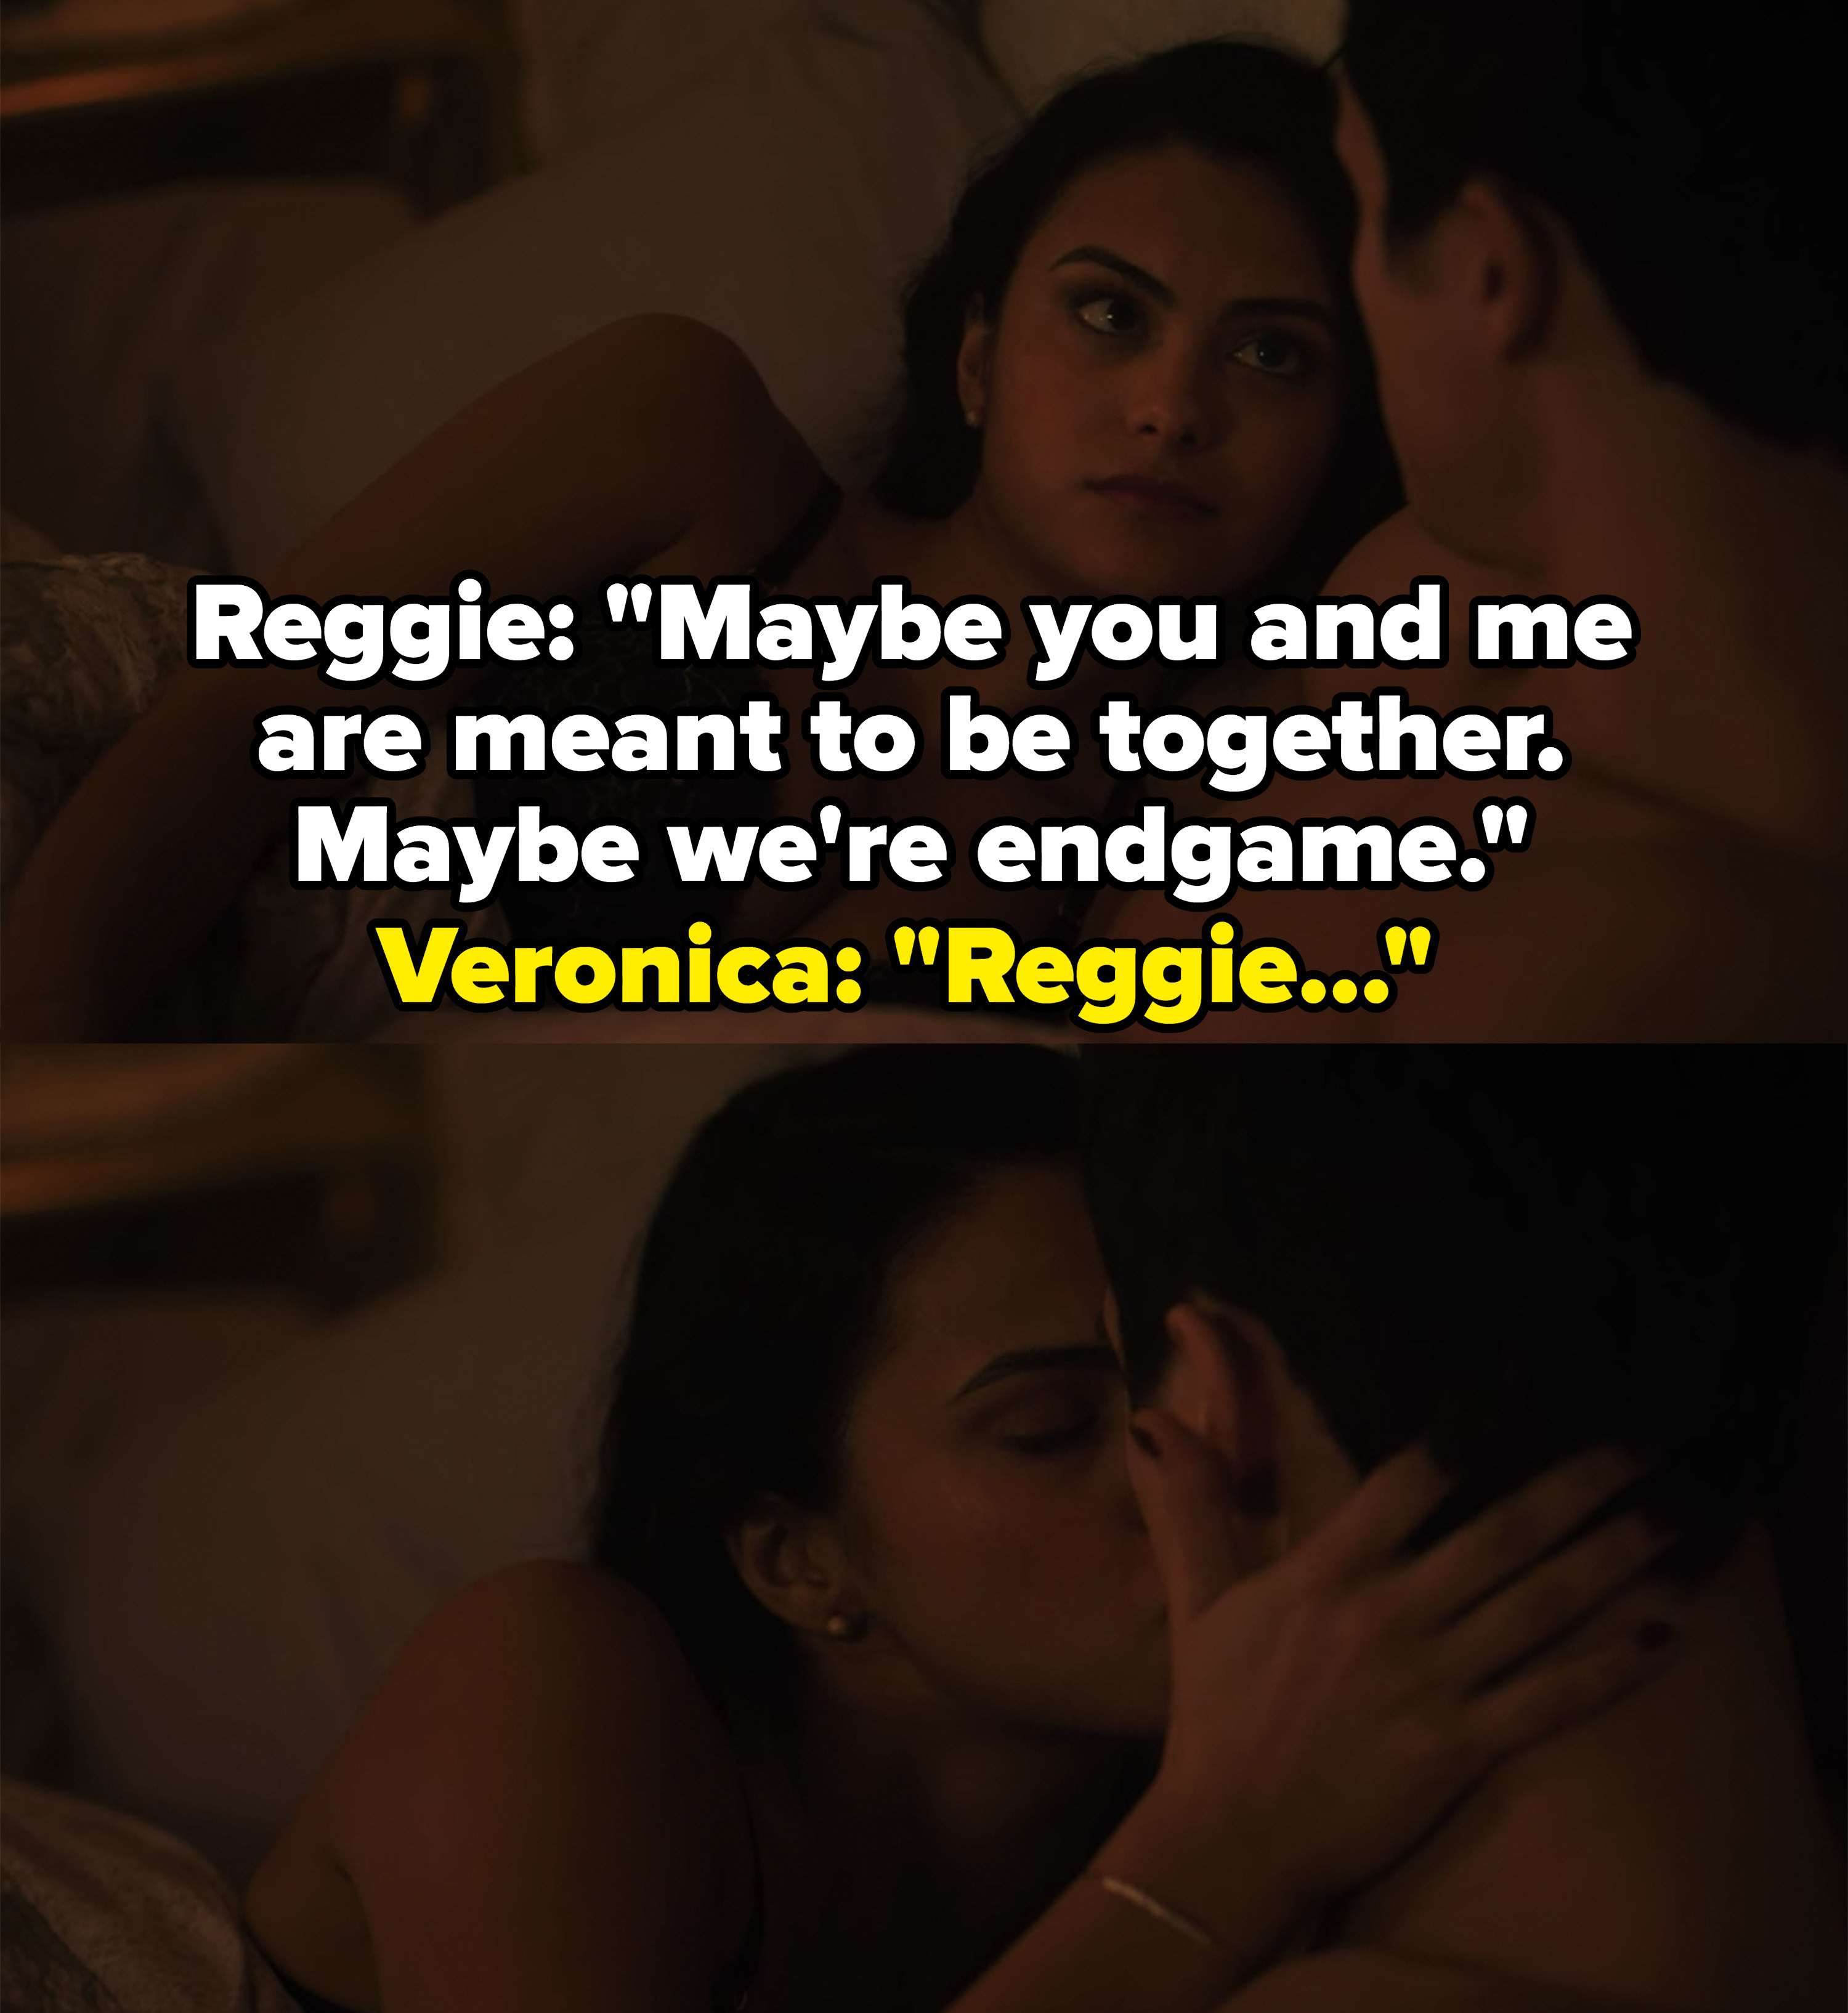 Reggie says maybe he and Veronica are &quot;endgame,&quot; she kisses him